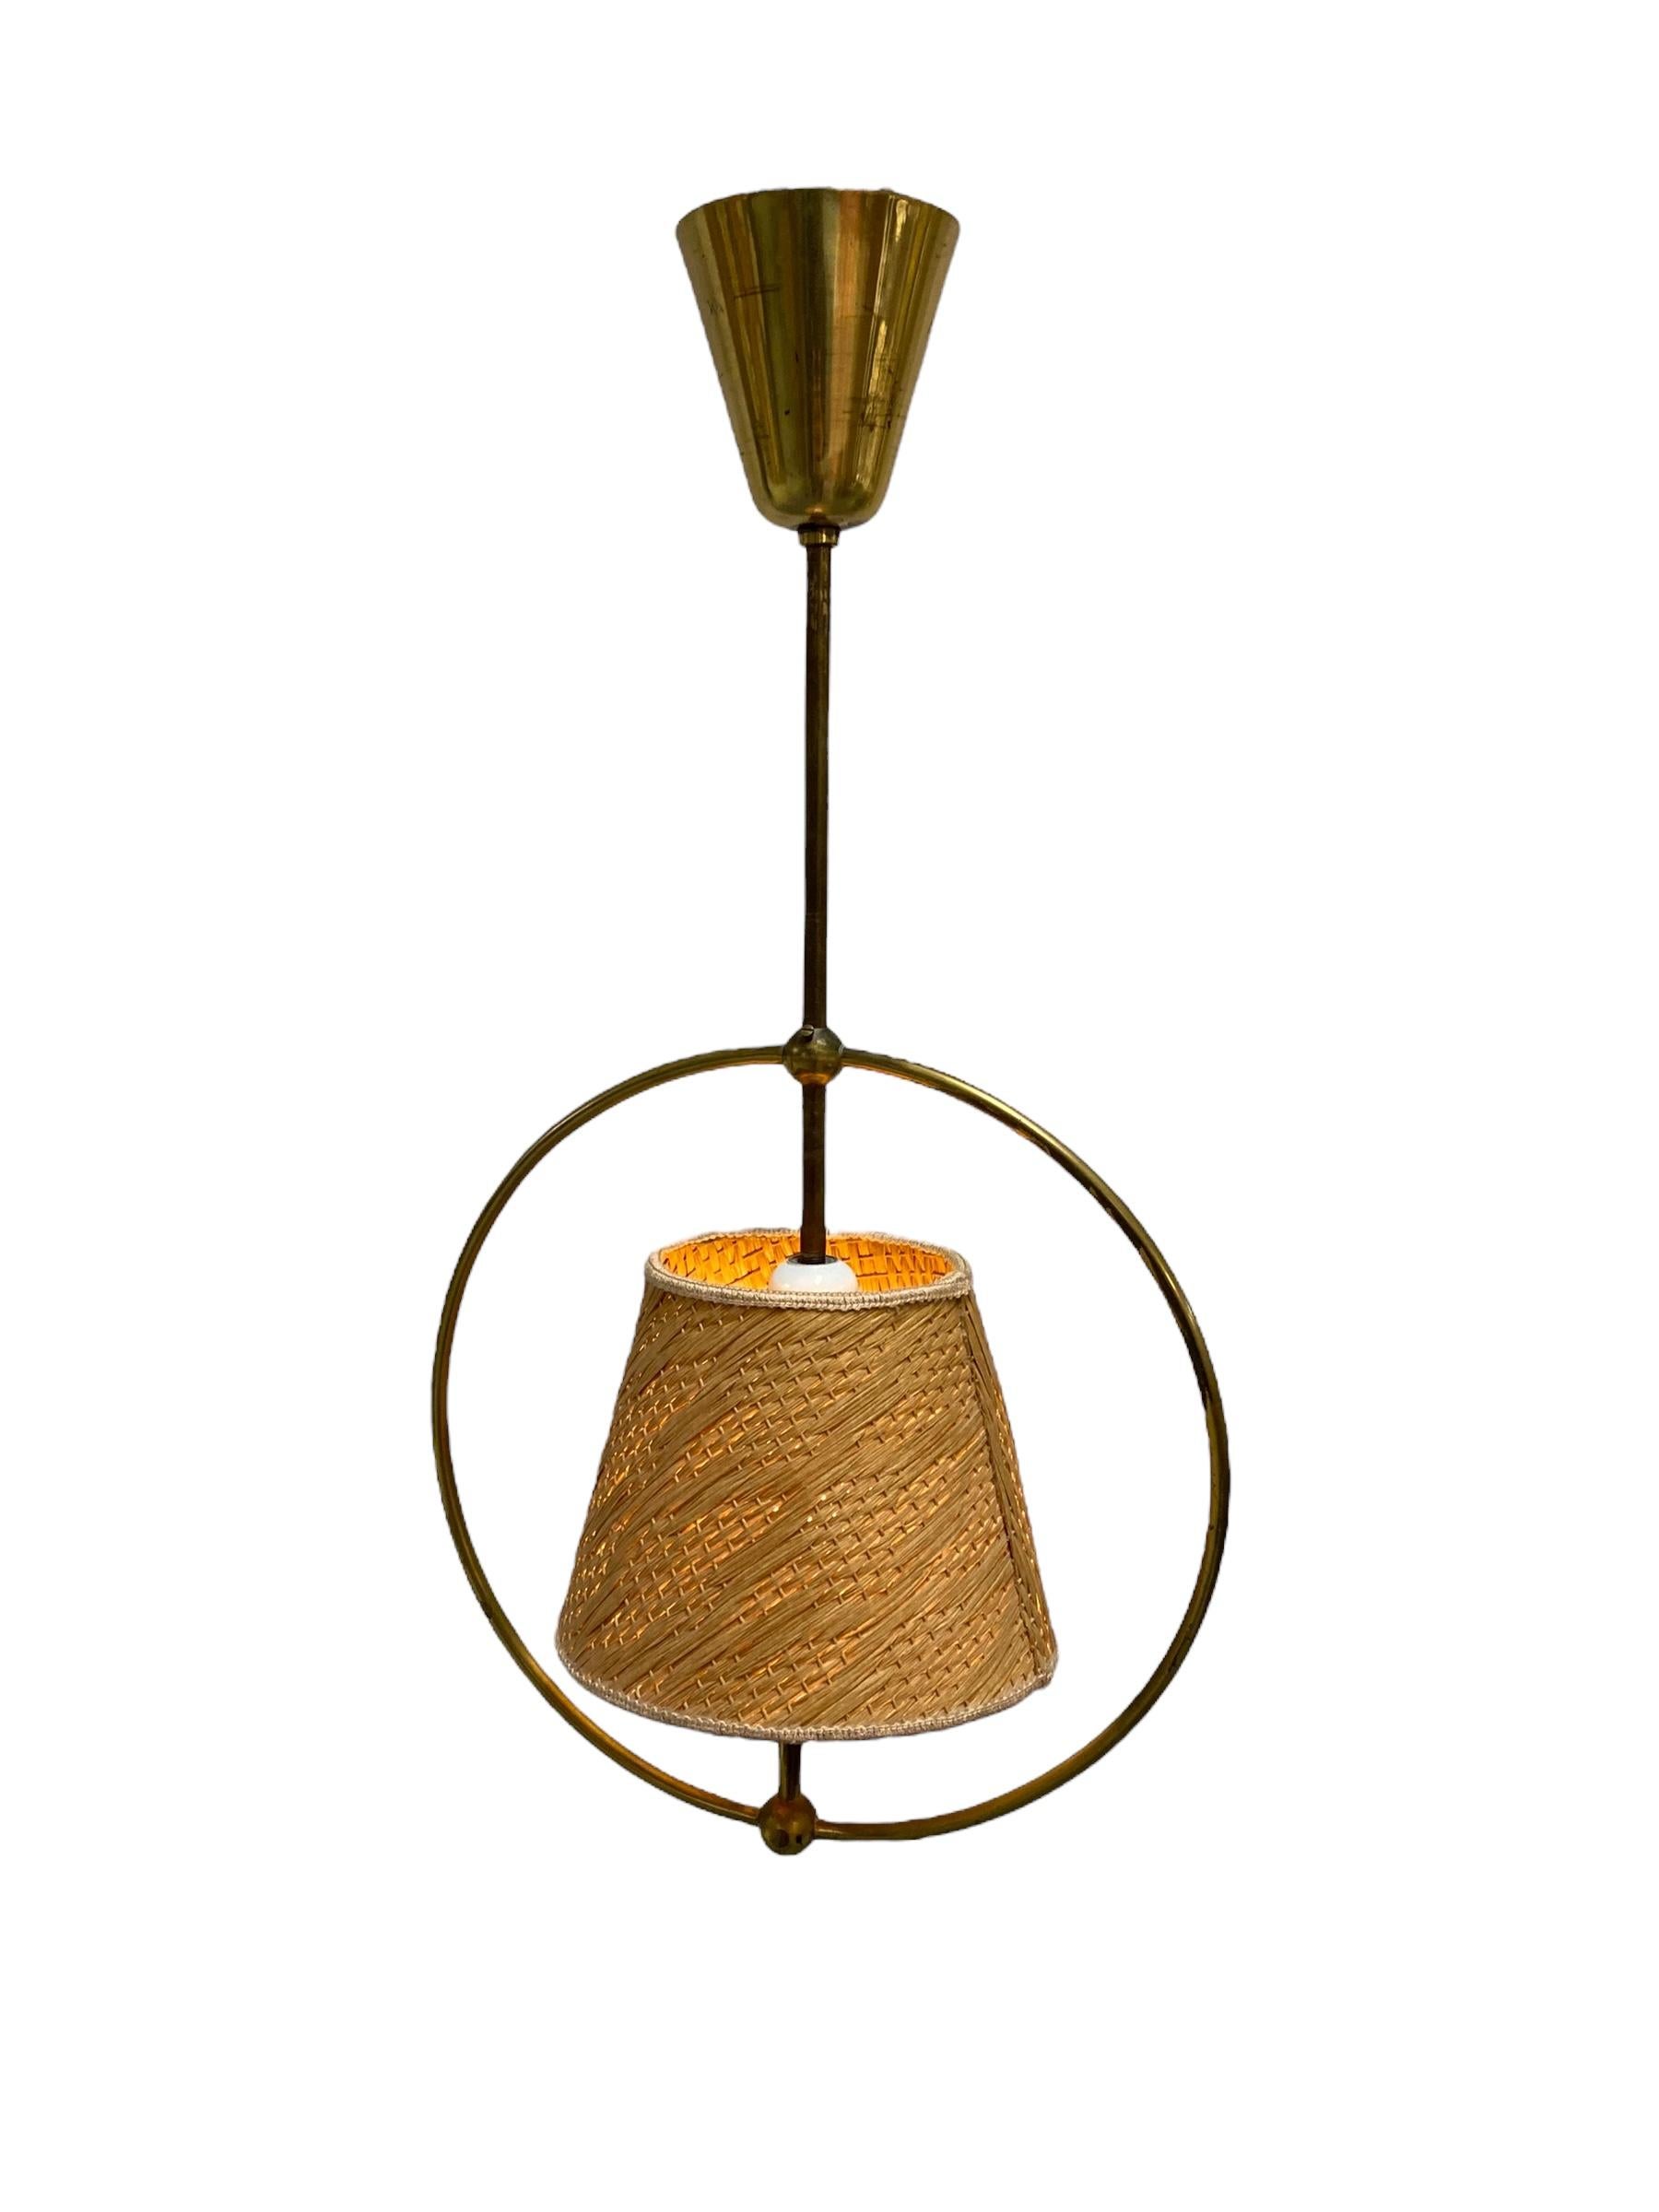 Finnish A Maria Lindeman Ceiling Lamp Model. 50591, 1950s For Sale